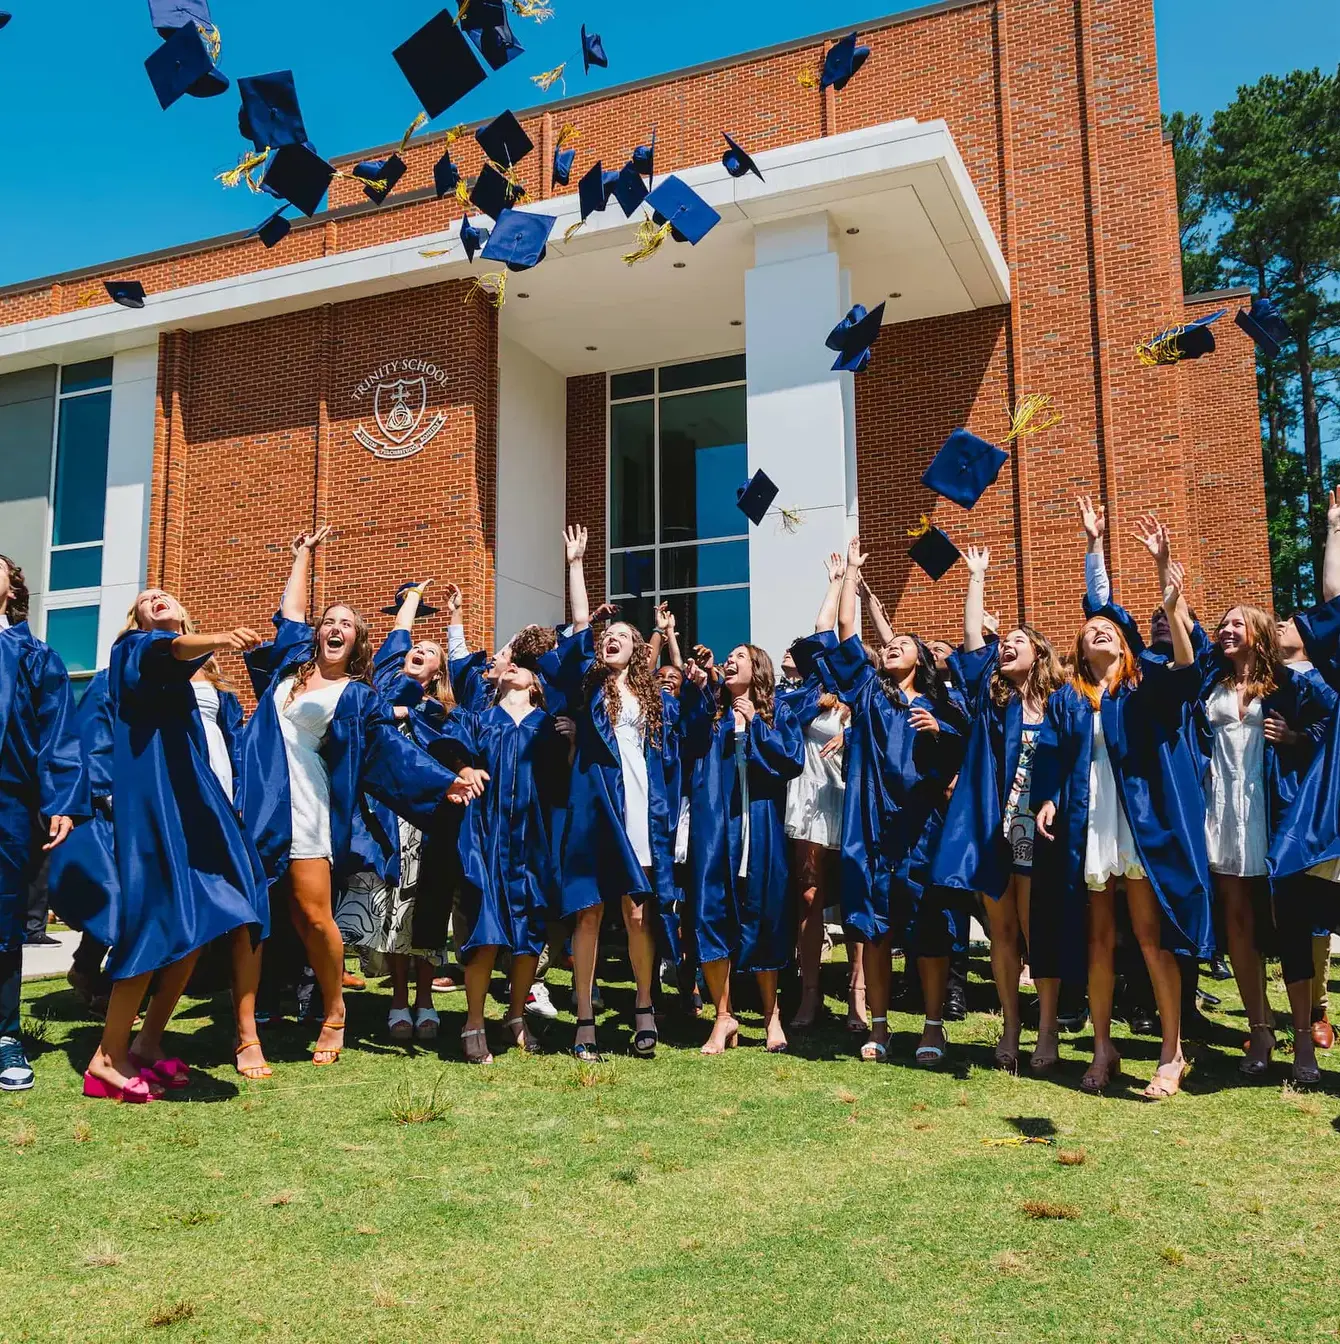 Exuberant high school graduates in blue gowns joyfully tossing their caps in the air in front of their school building.